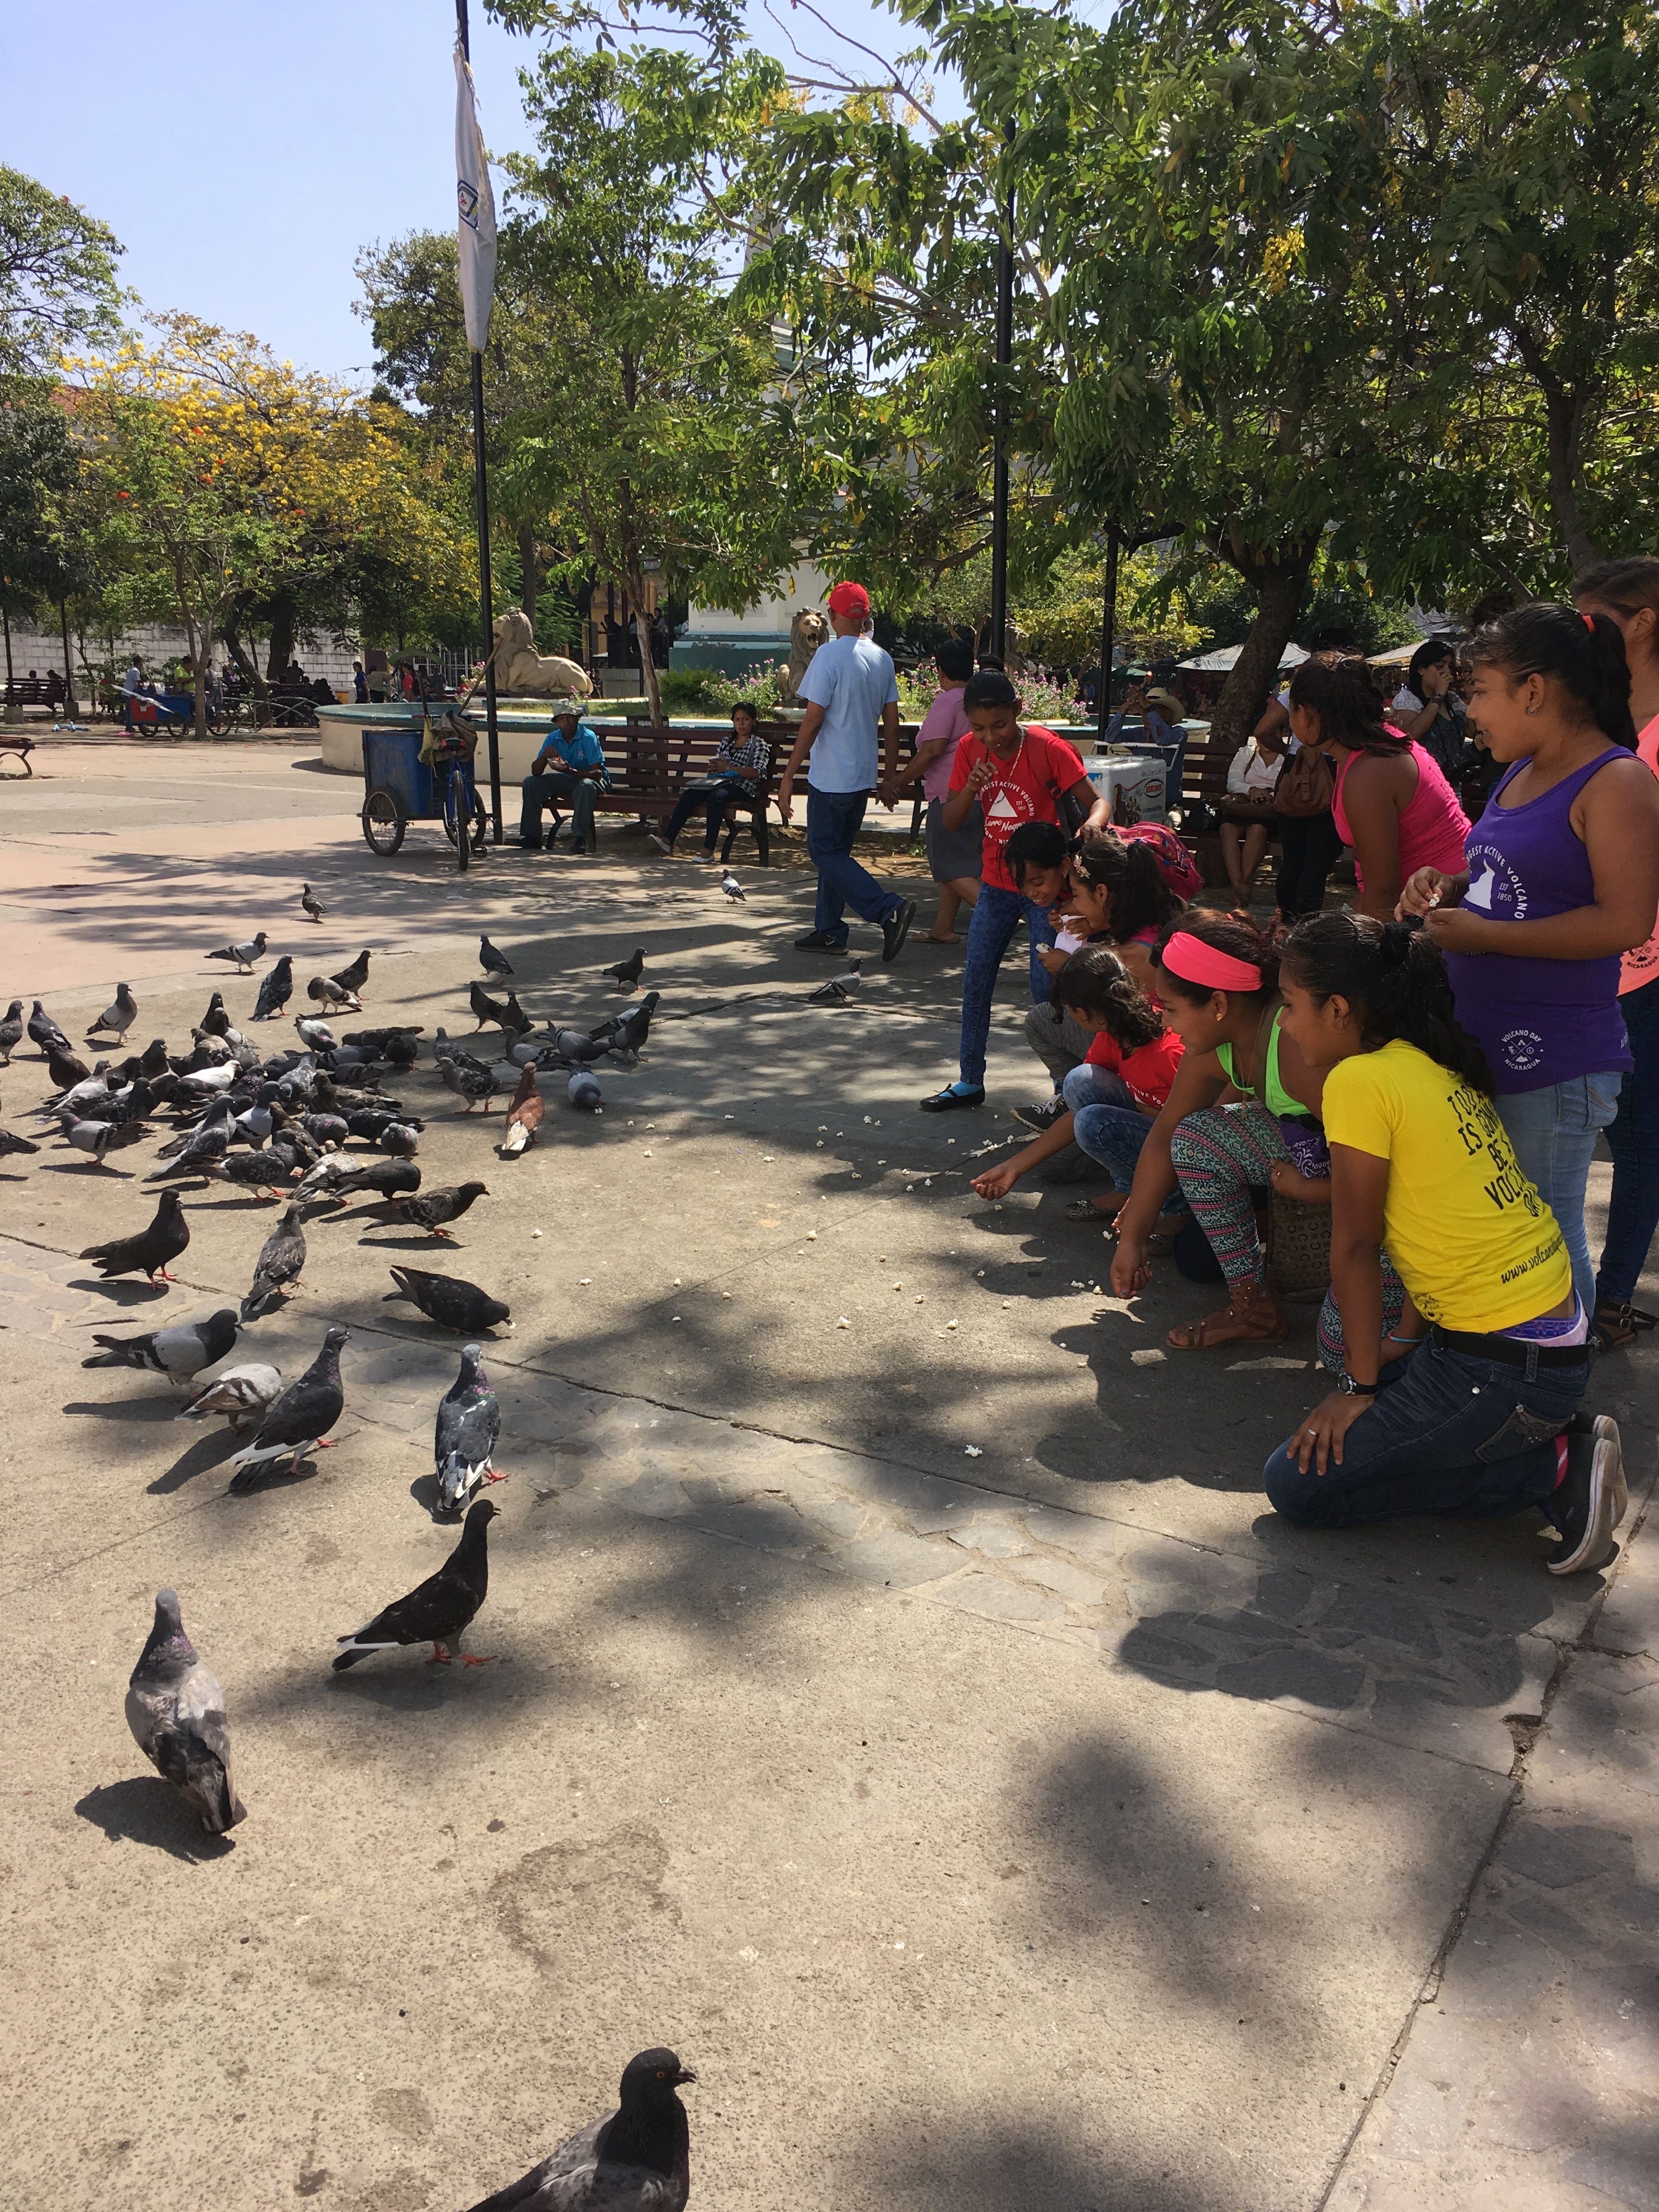 Our 7th graders loved seeing all of the pigeons in the park and were excited to feed them. 